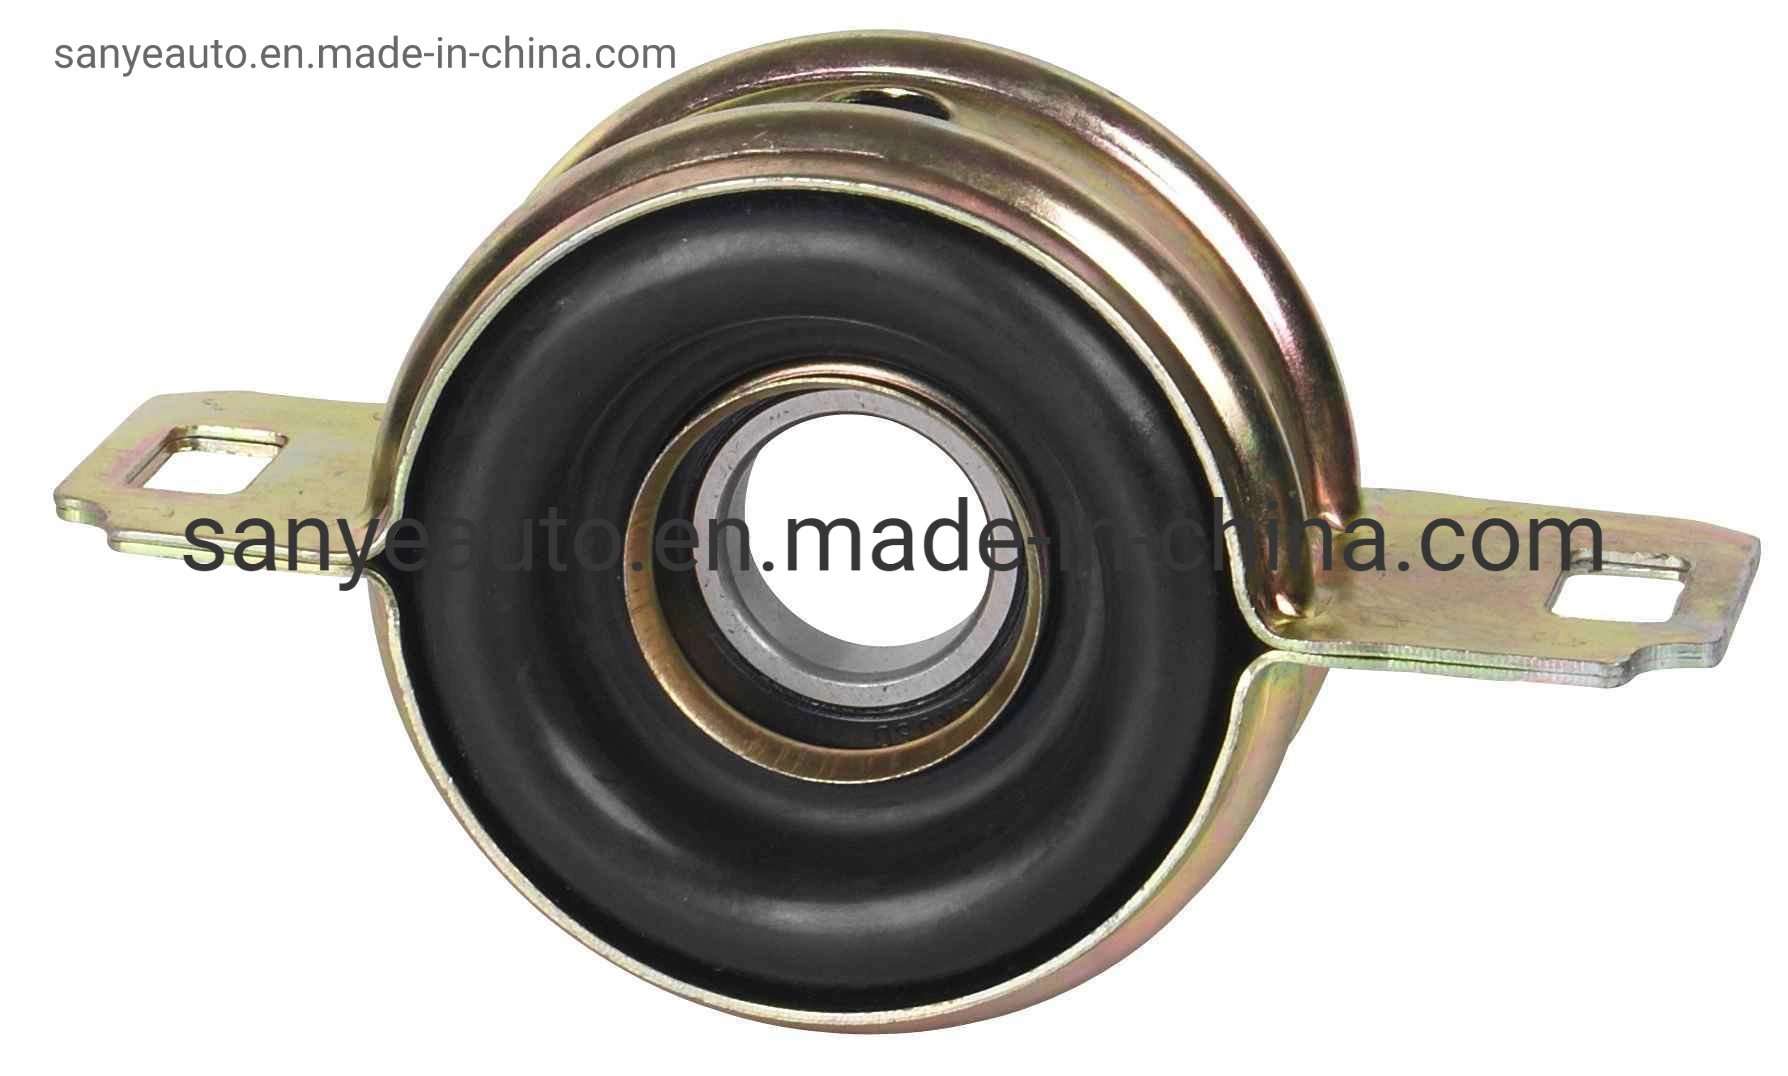 Ap-Jsw Brand High Quality 37230-22140 for Toyota Center Bearing